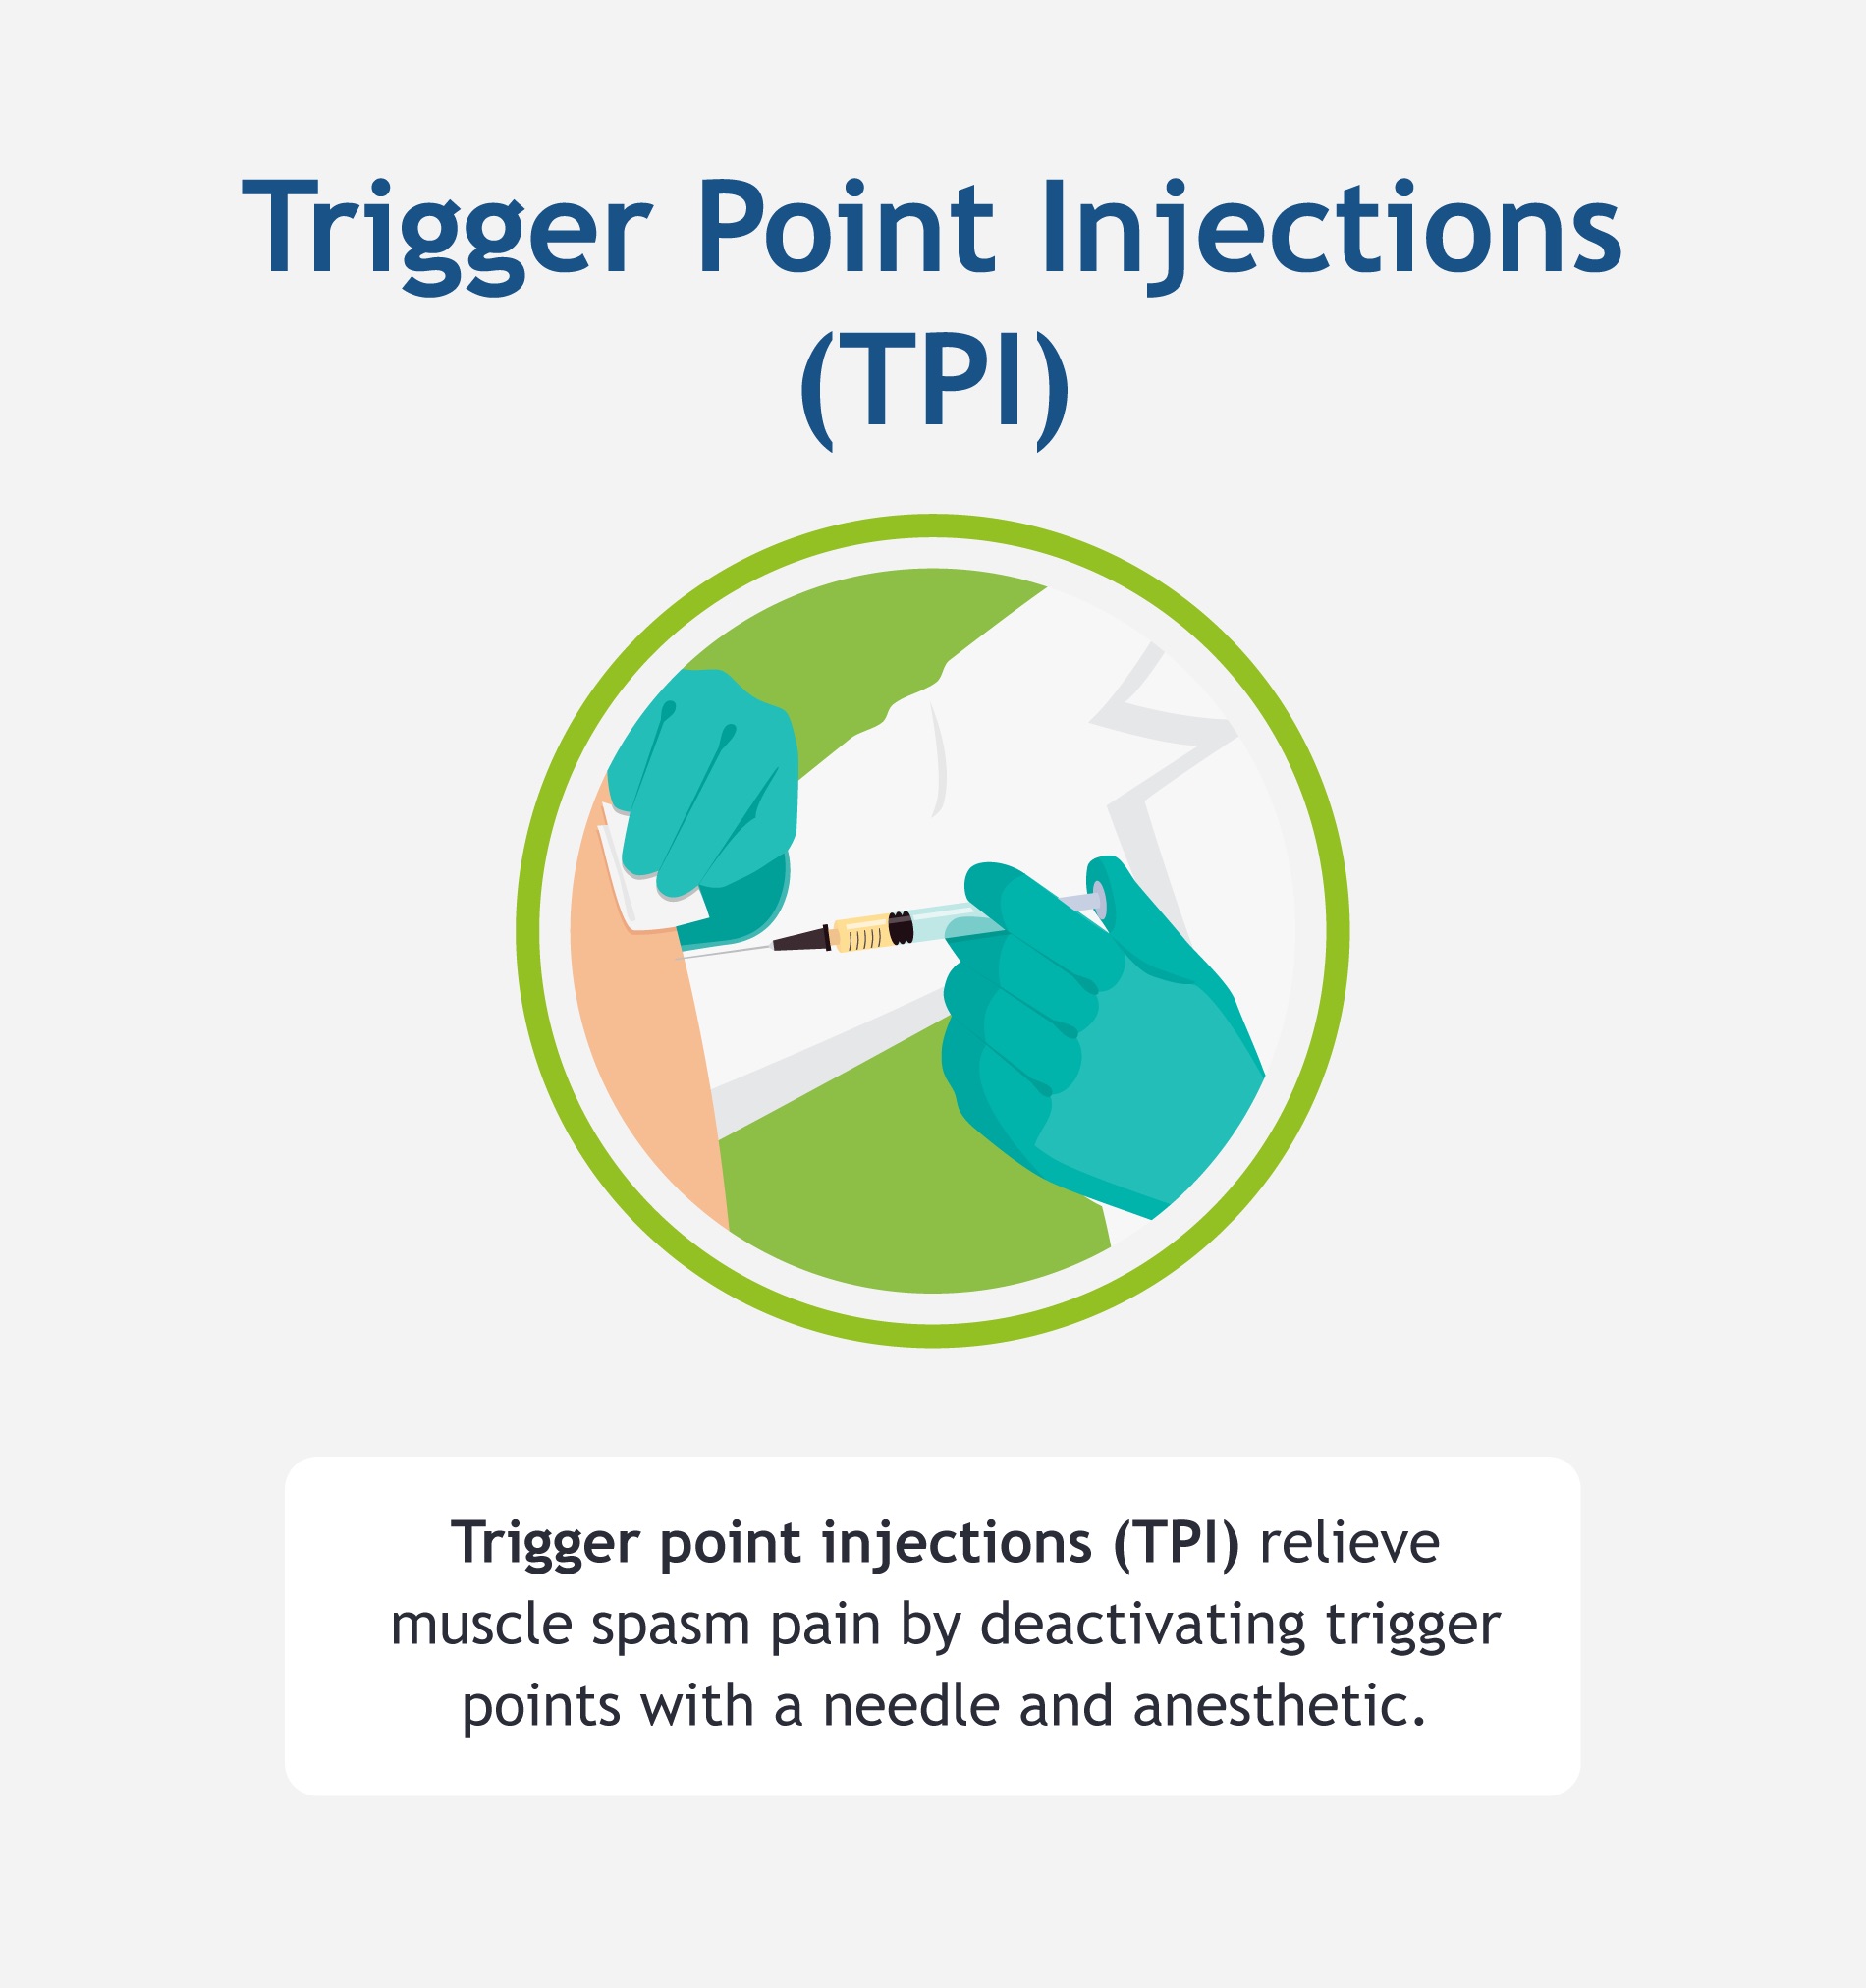 An infographic describing what trigger point injections are.